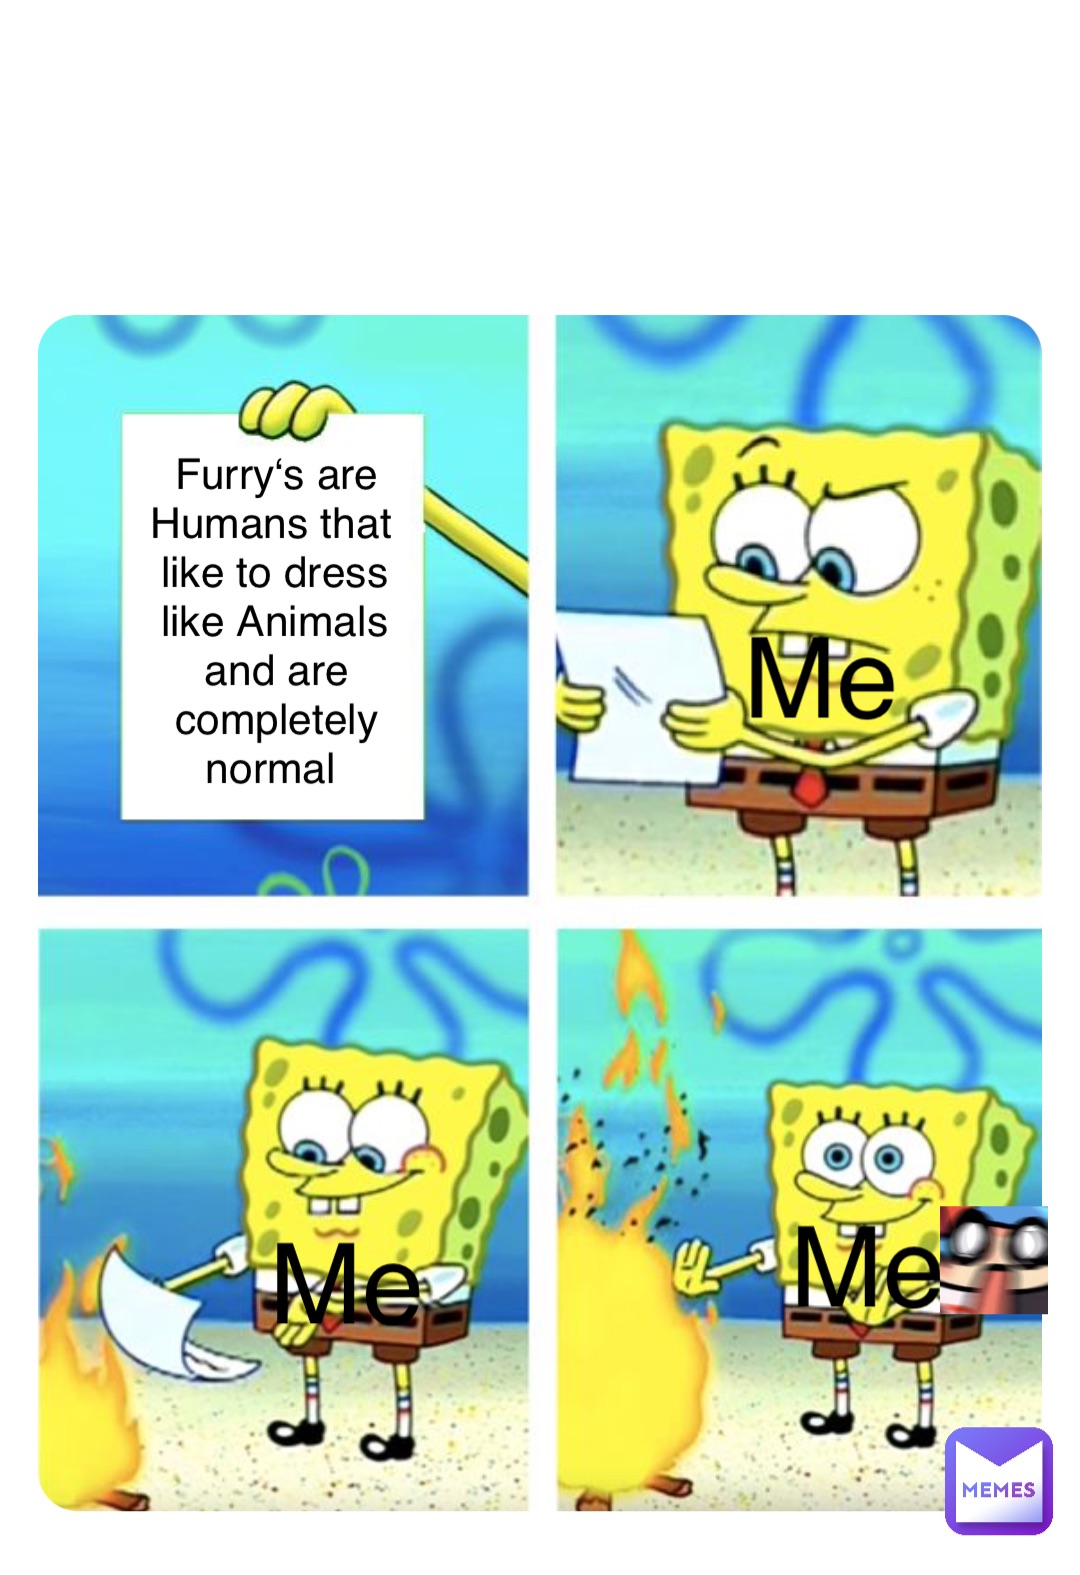 Double tap to edit Furry‘s are Humans that like to dress like Animals and are completely normal Me Me Me